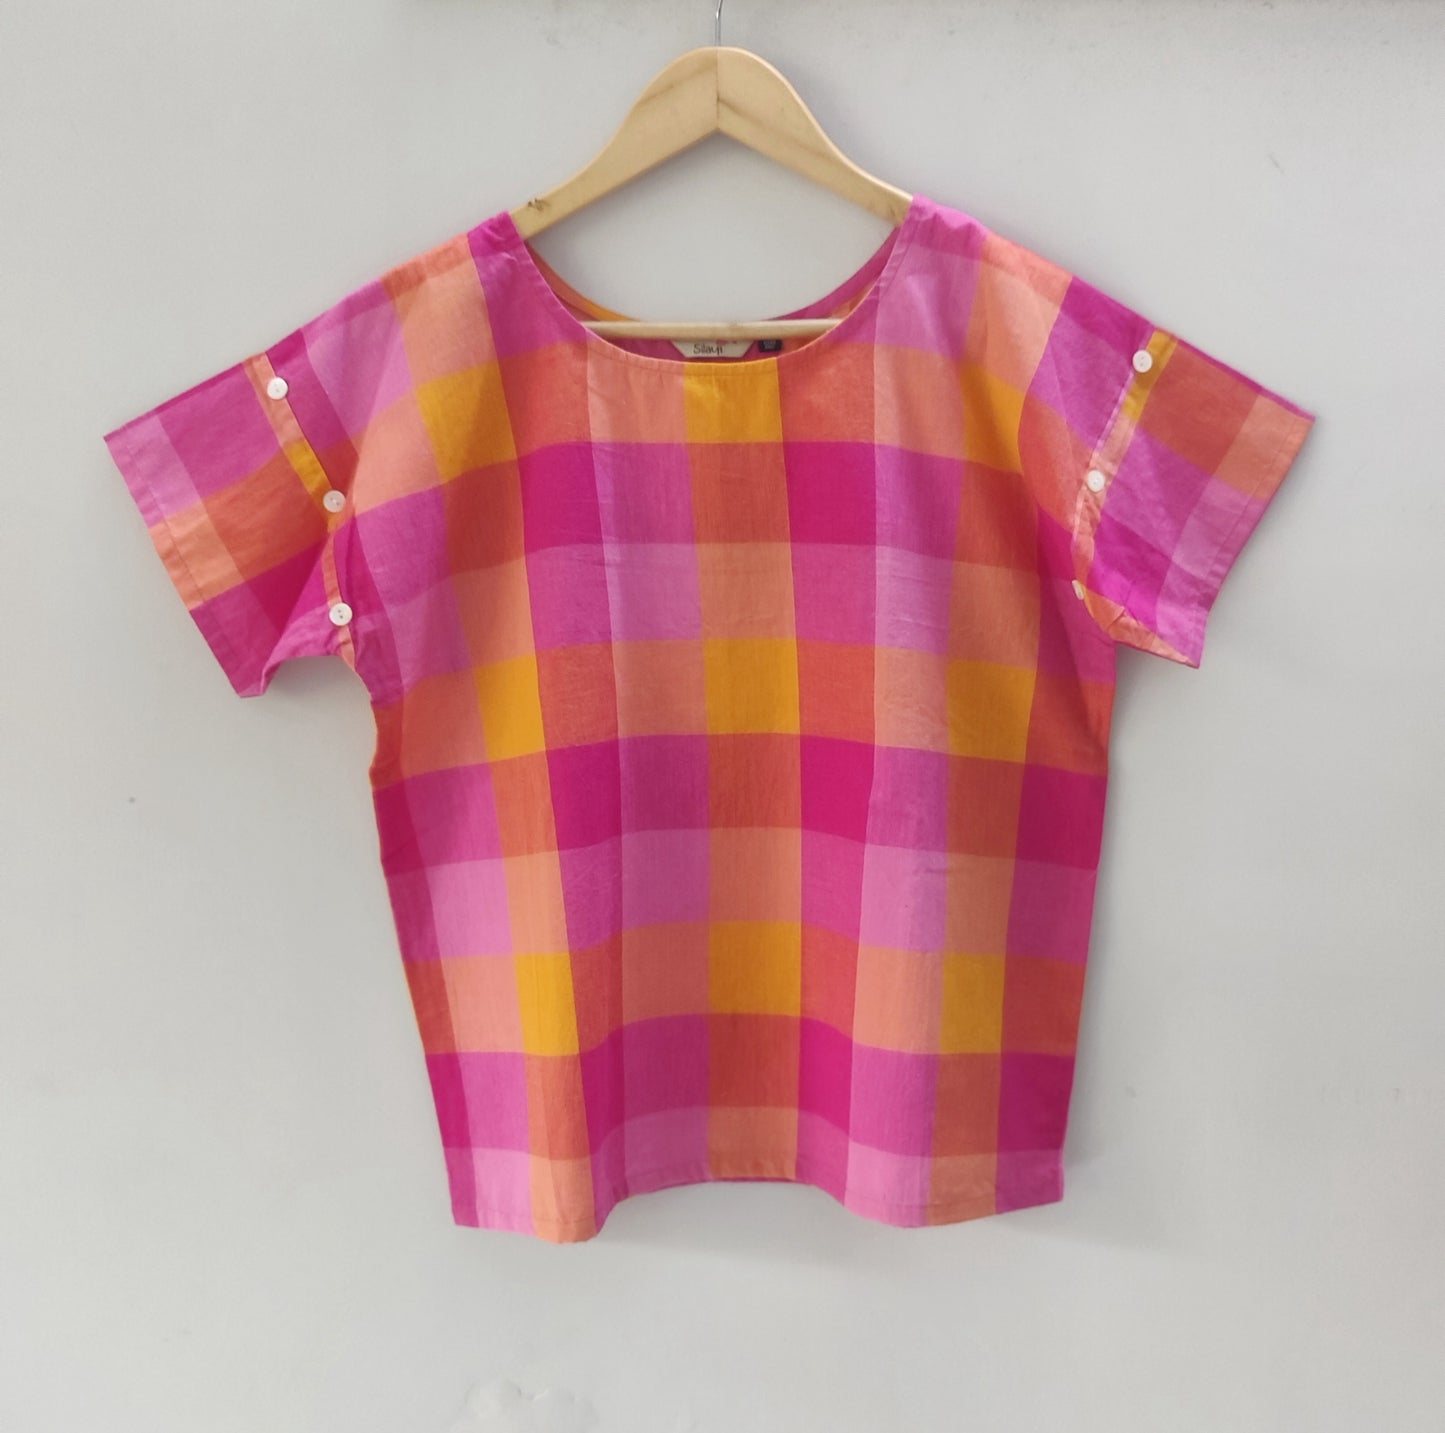 Pink boxy top - www.silayi.in